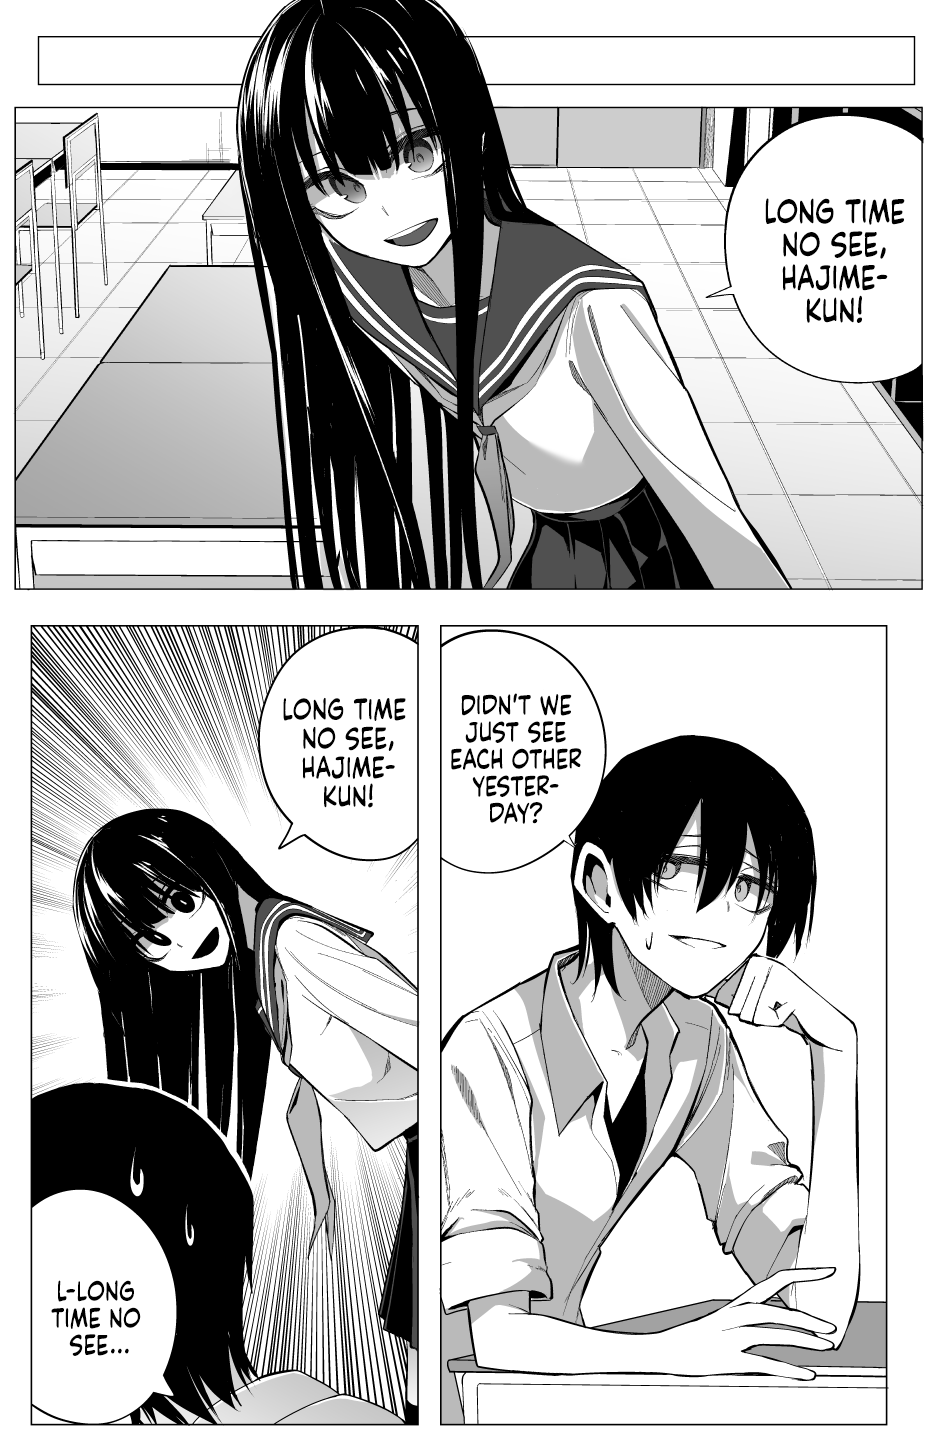 Mitsuishi-San Chapter 18: Talking To That Girl You Like From Another Class Is Fun - Picture 2